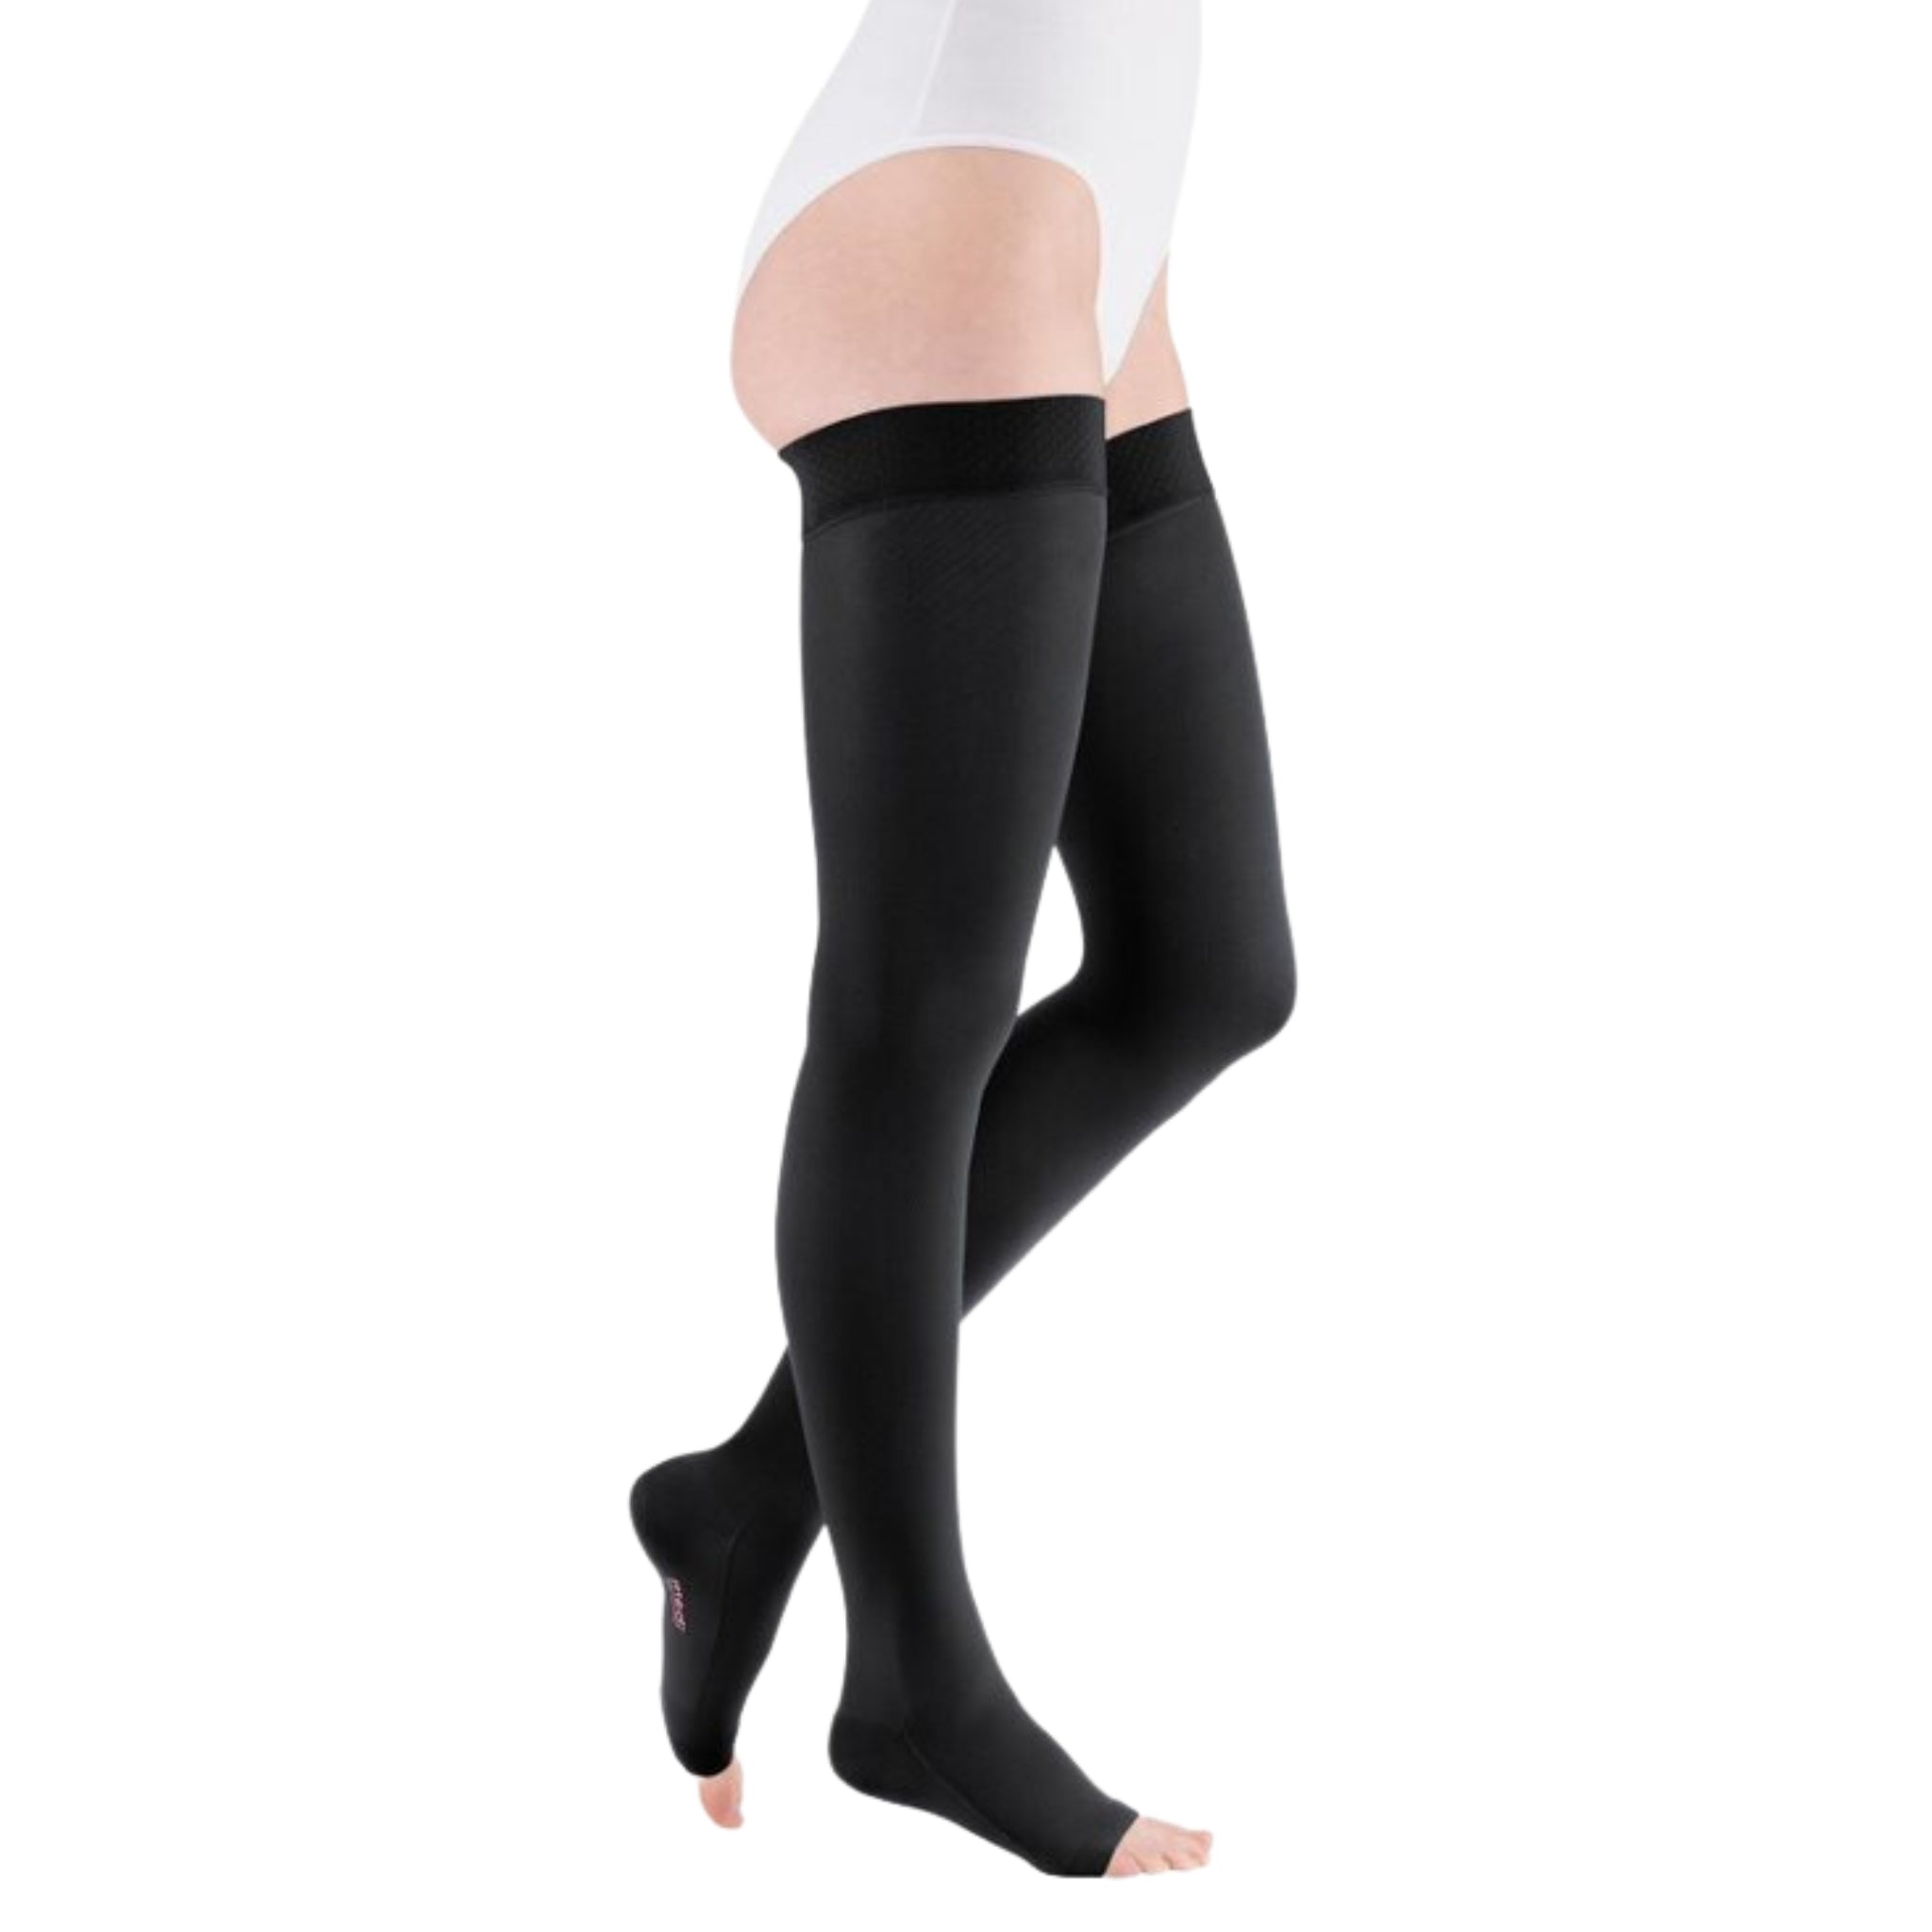 mediven comfort Thigh High Compression Stocking Silicone Topband Black